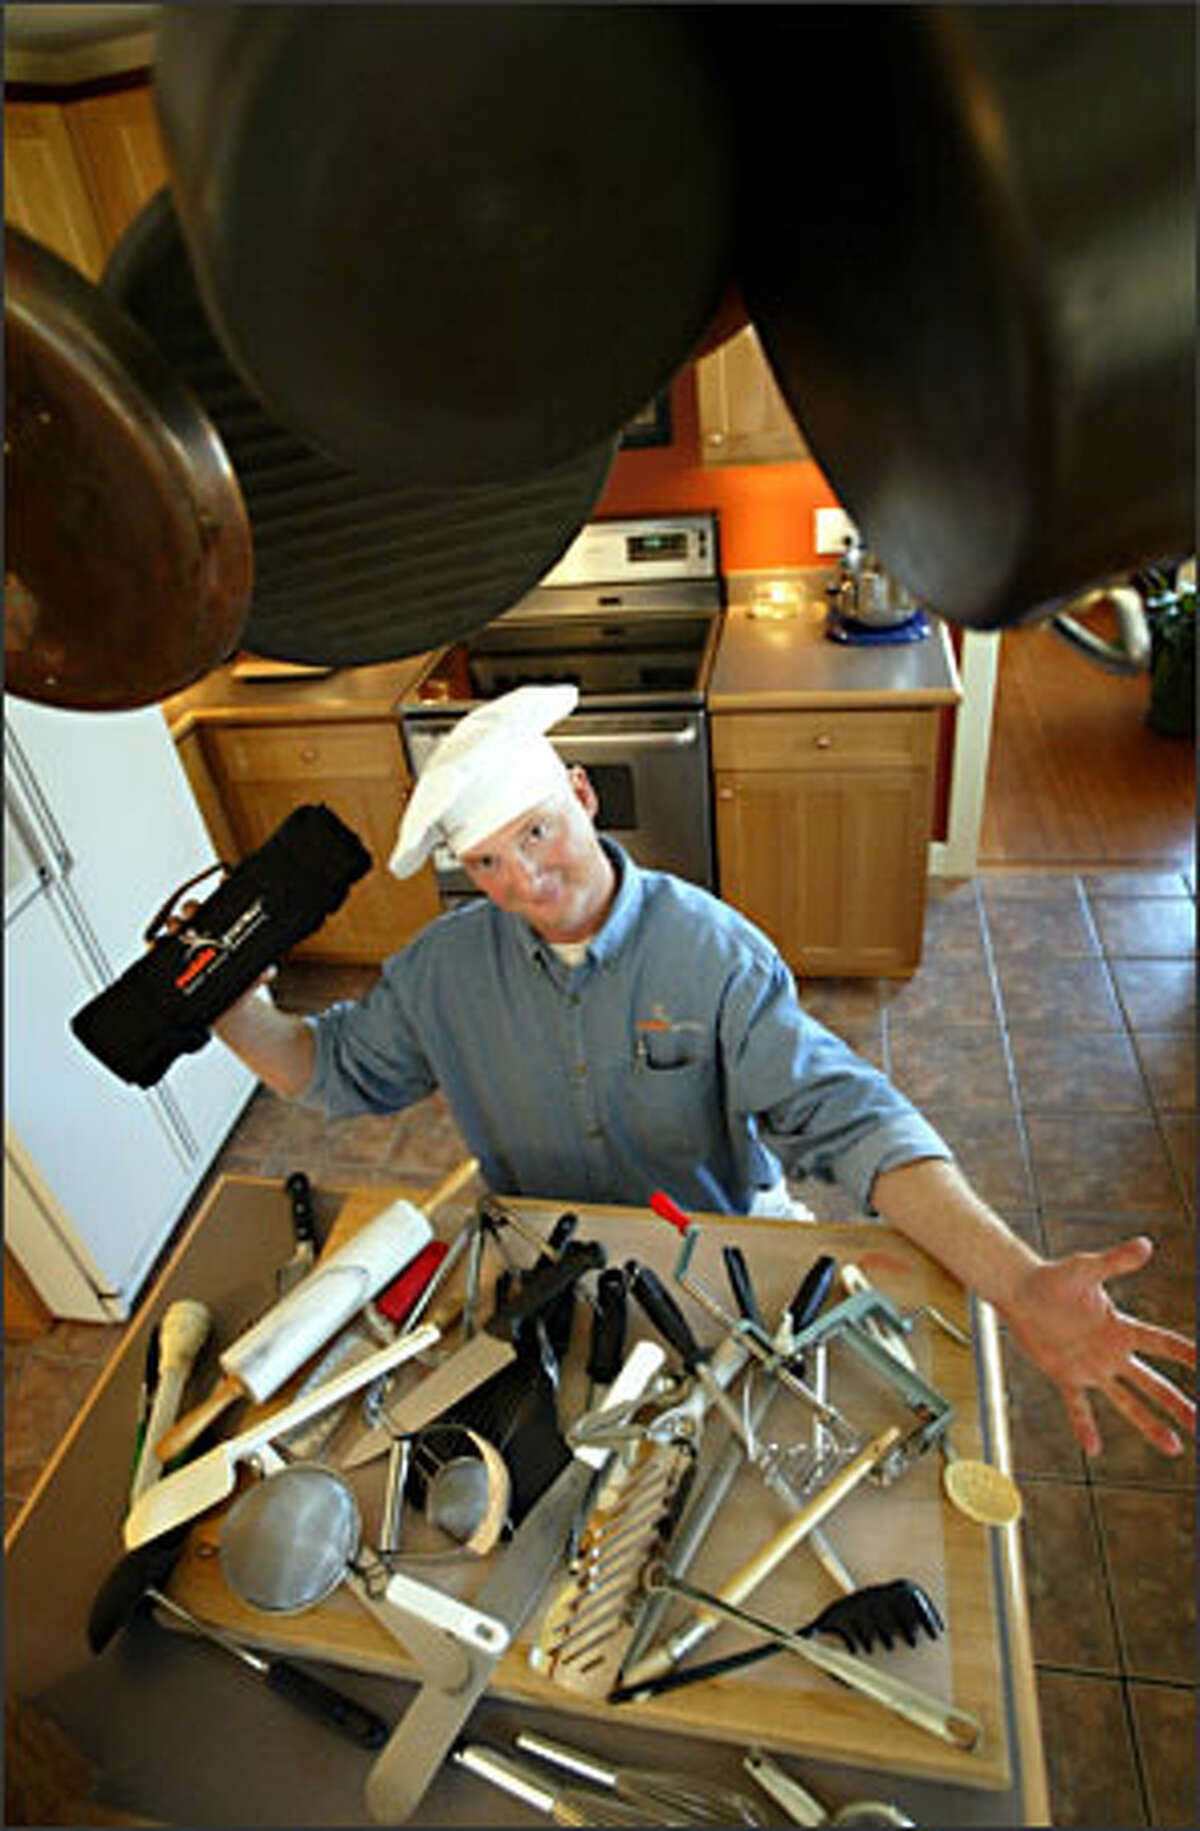 Kevin Utter of Seattle has turned his obsession for cooking tools into a business, Mobile Gourmet (www.mobilegourmet.com), which produces portable kits that carry any number of tool or spice combinations for the cook on the go.